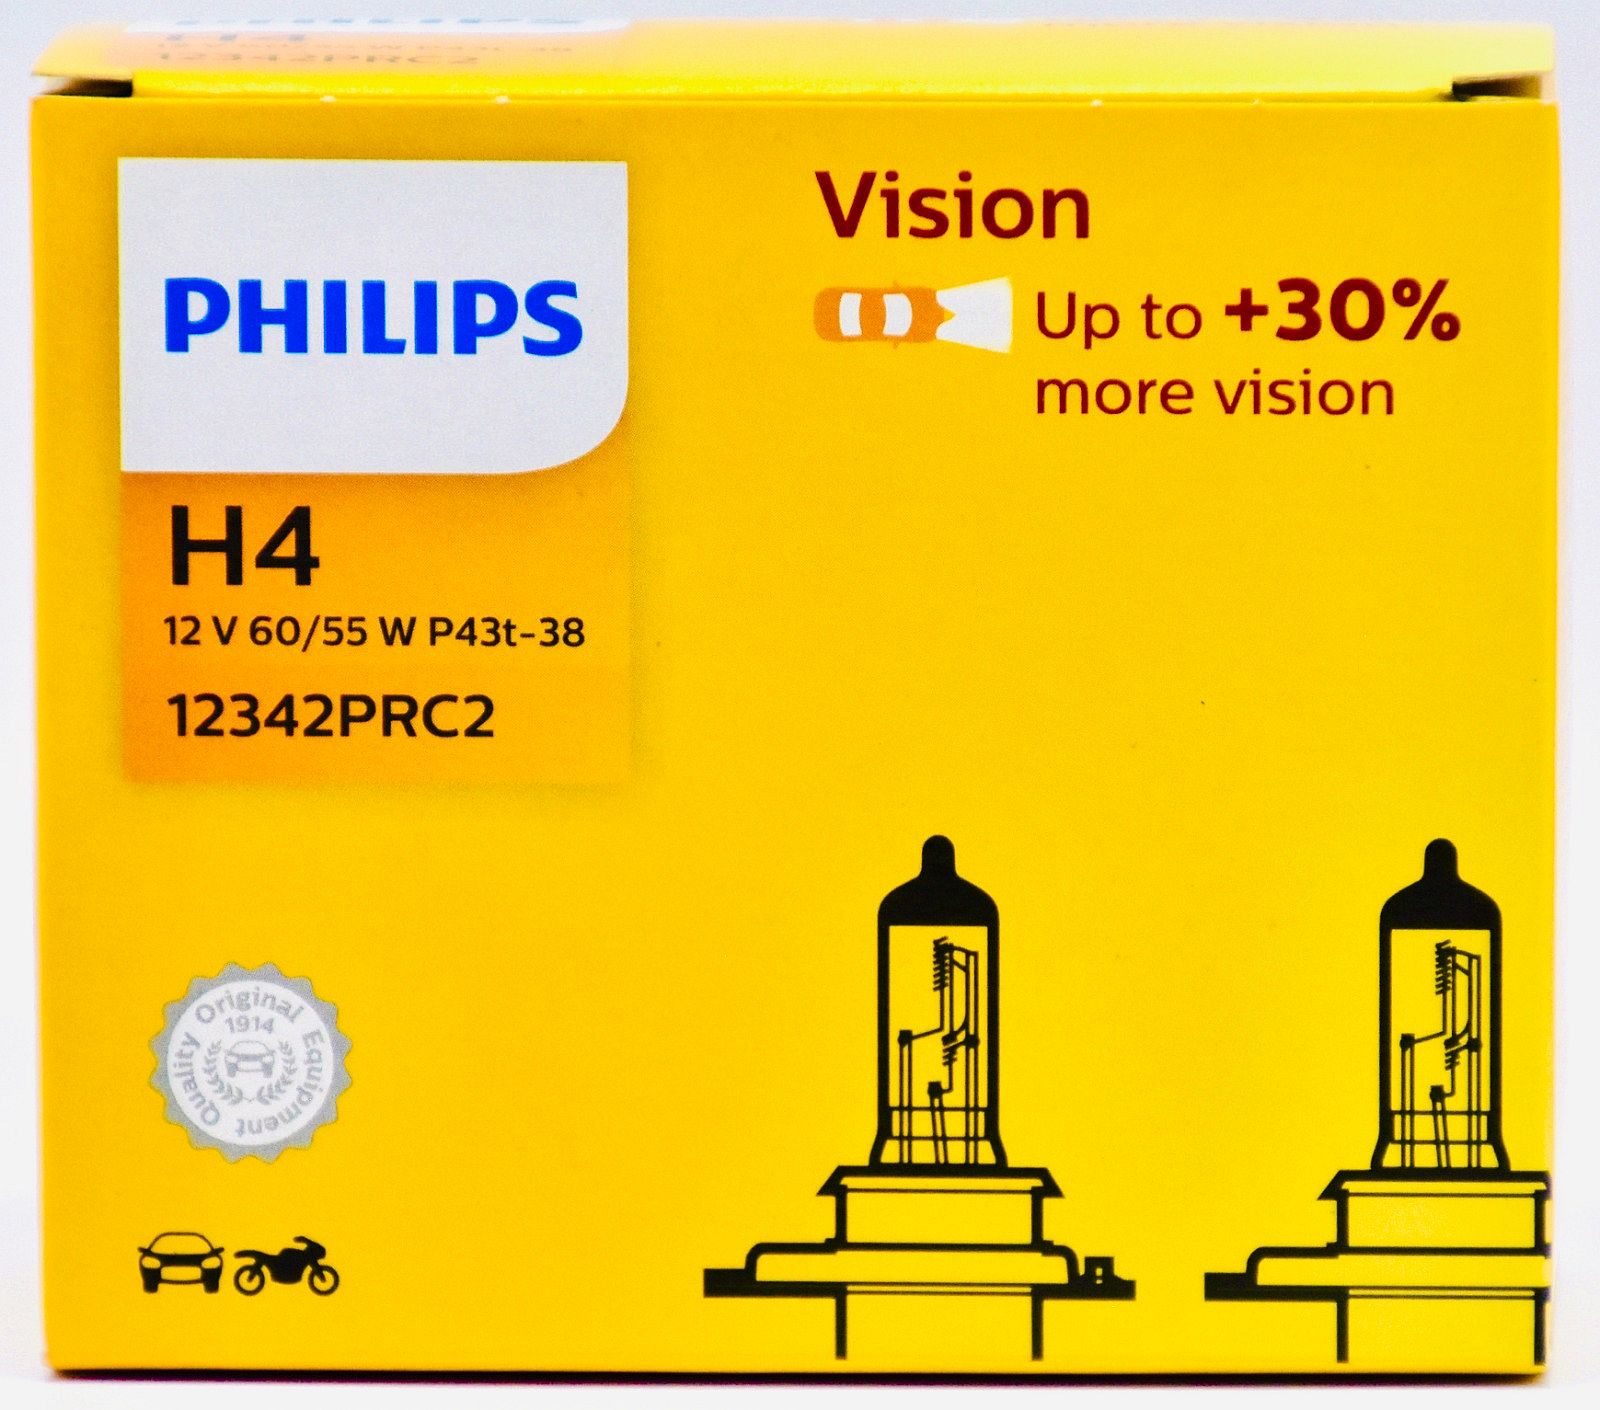 Philips Vision. Philips Vision excel. D Vision 30. Филипс вижн